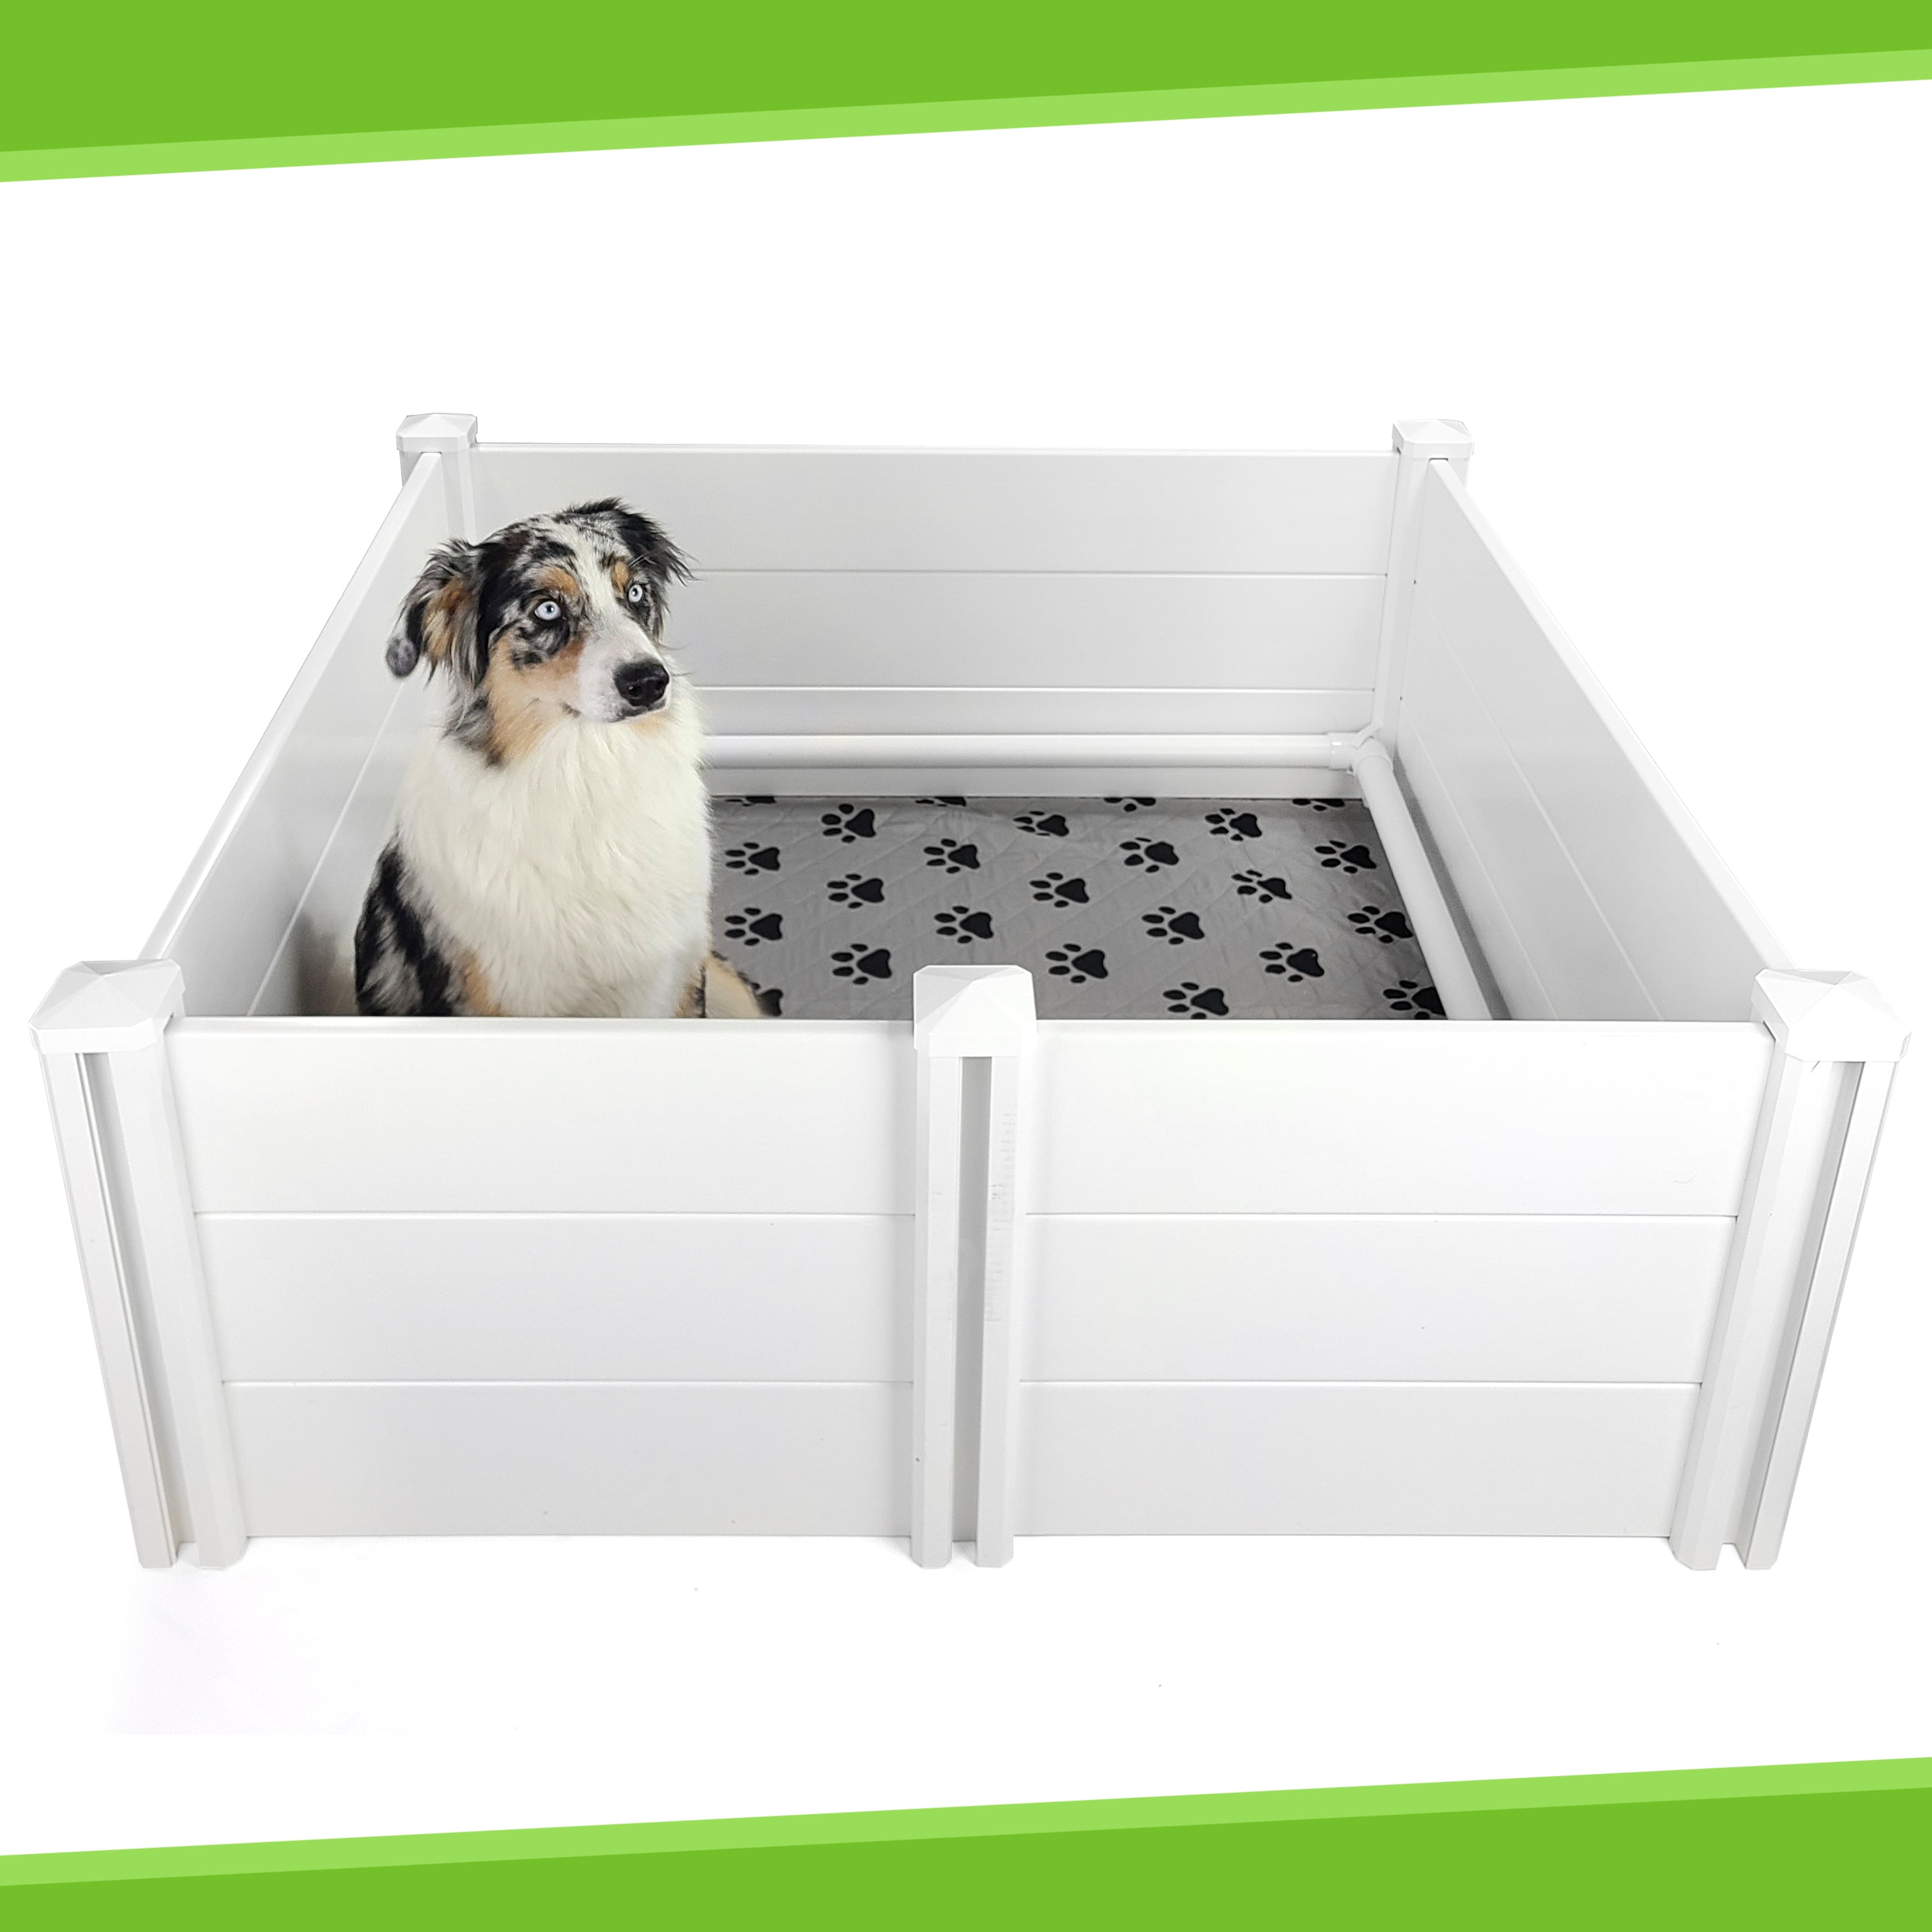 WhelpingBox for Dogs - Indoor Wooden for Puppies Birth - 39.4x39.4x23.6H Karsun